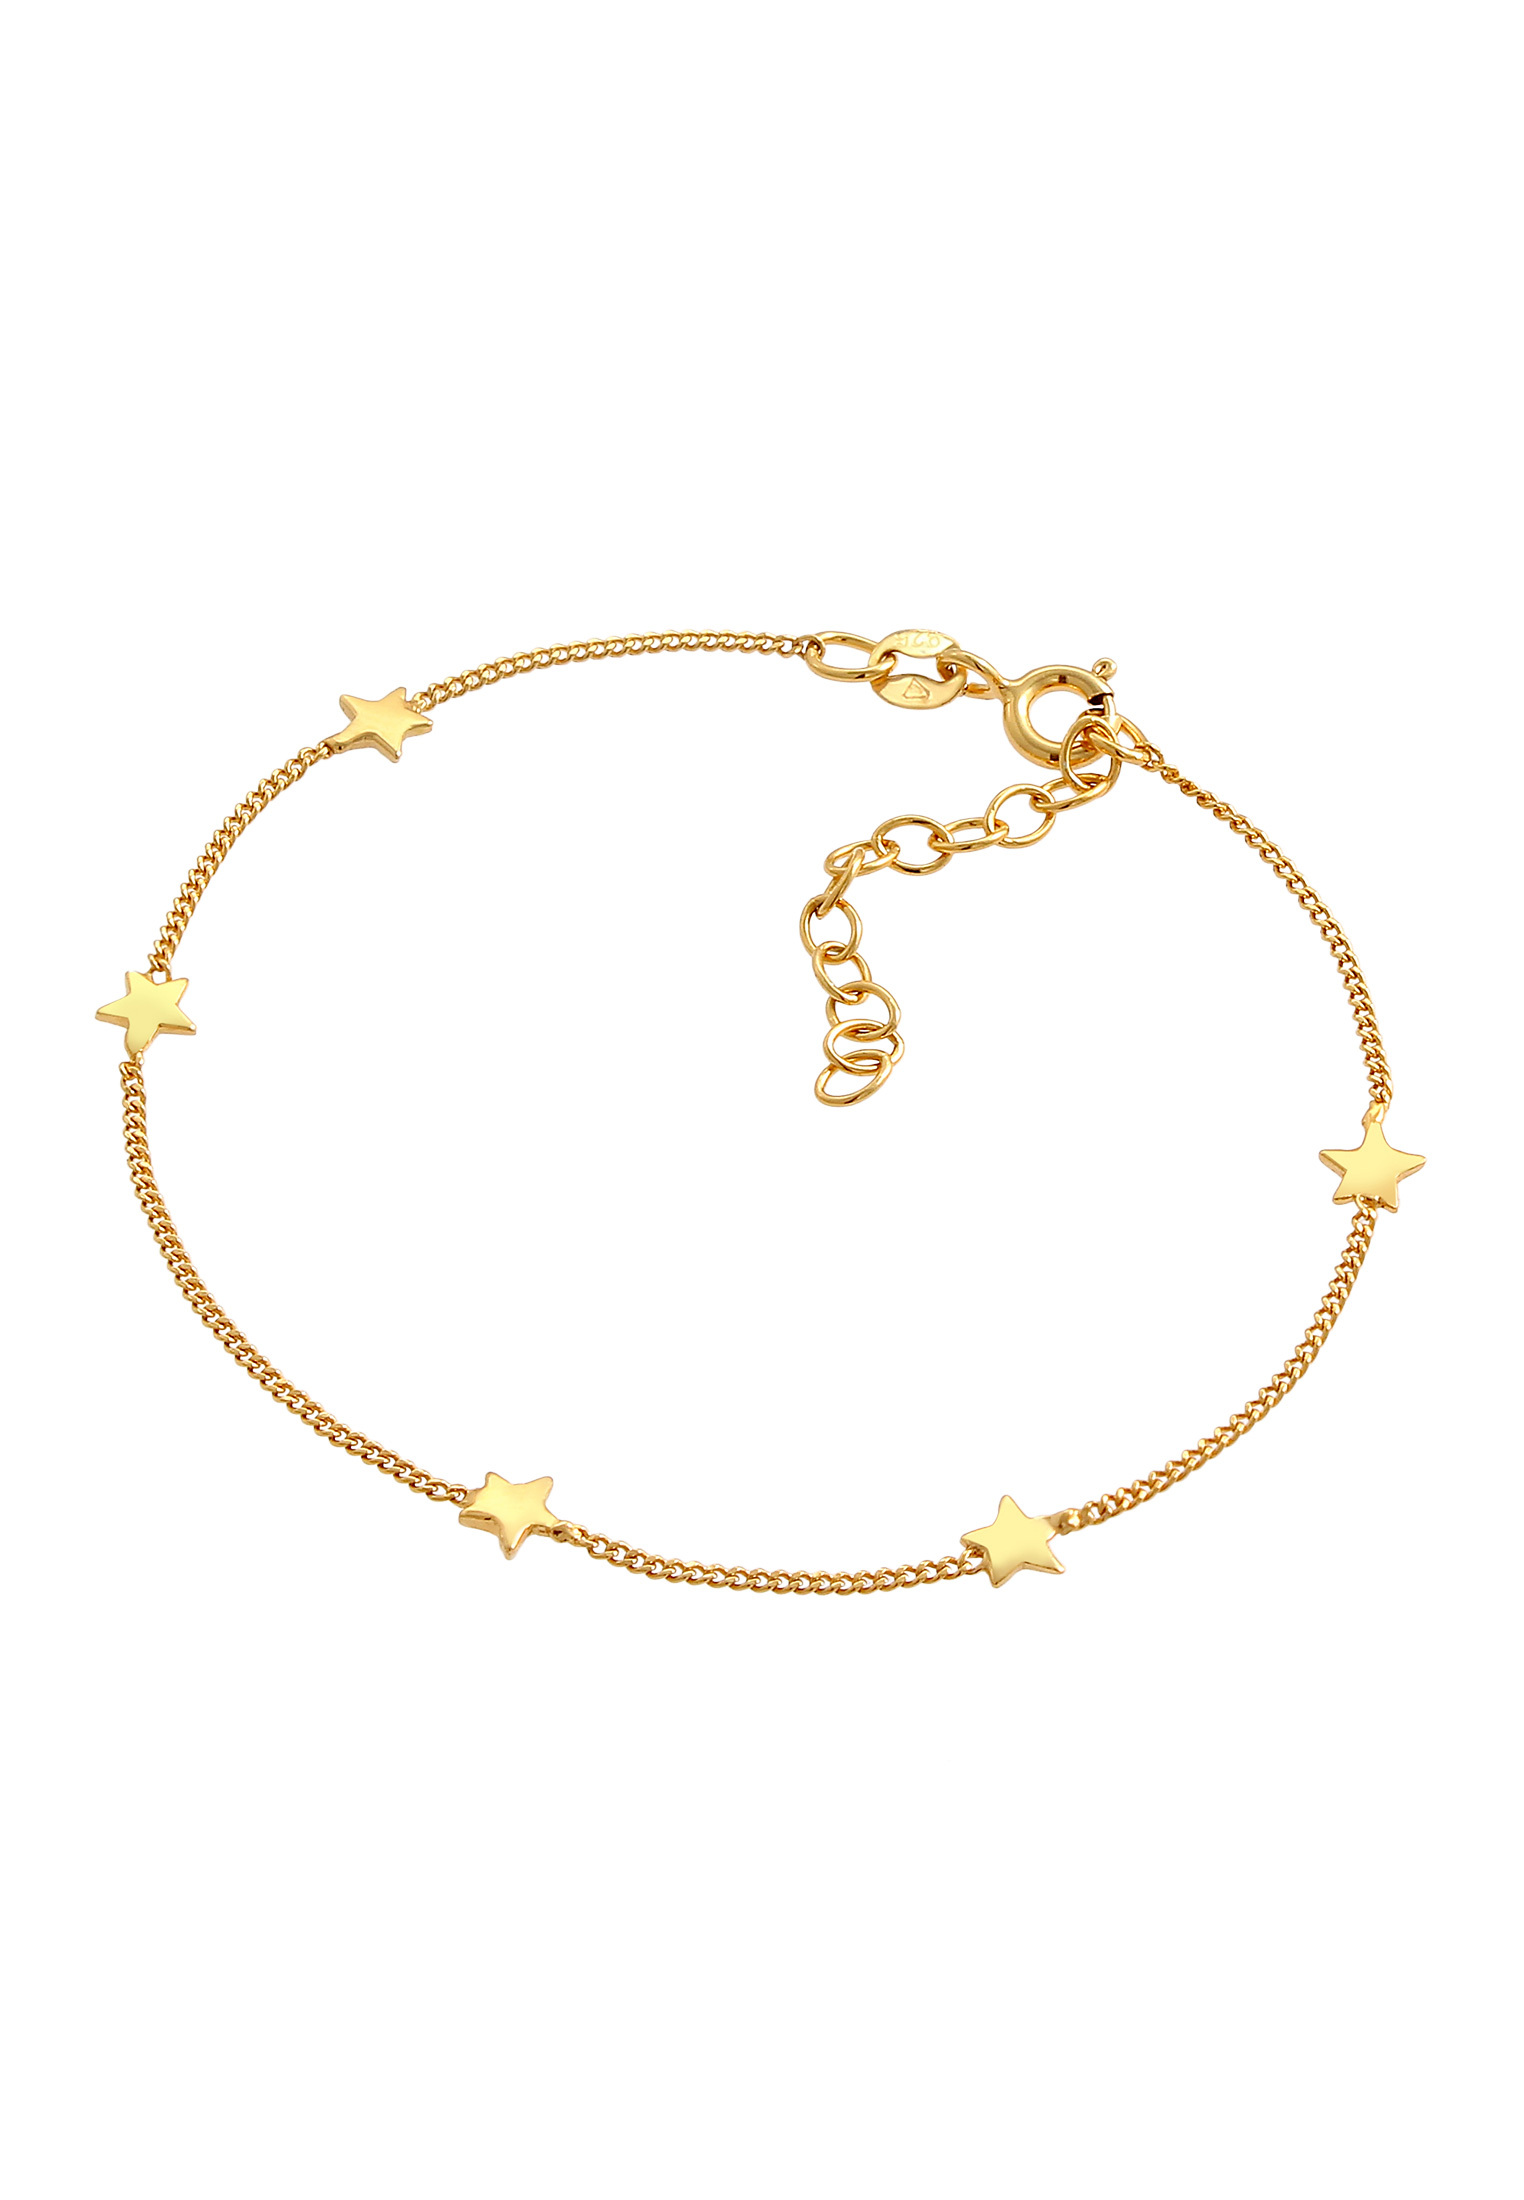 ELLI Armband Astro, Sterne in Gold 